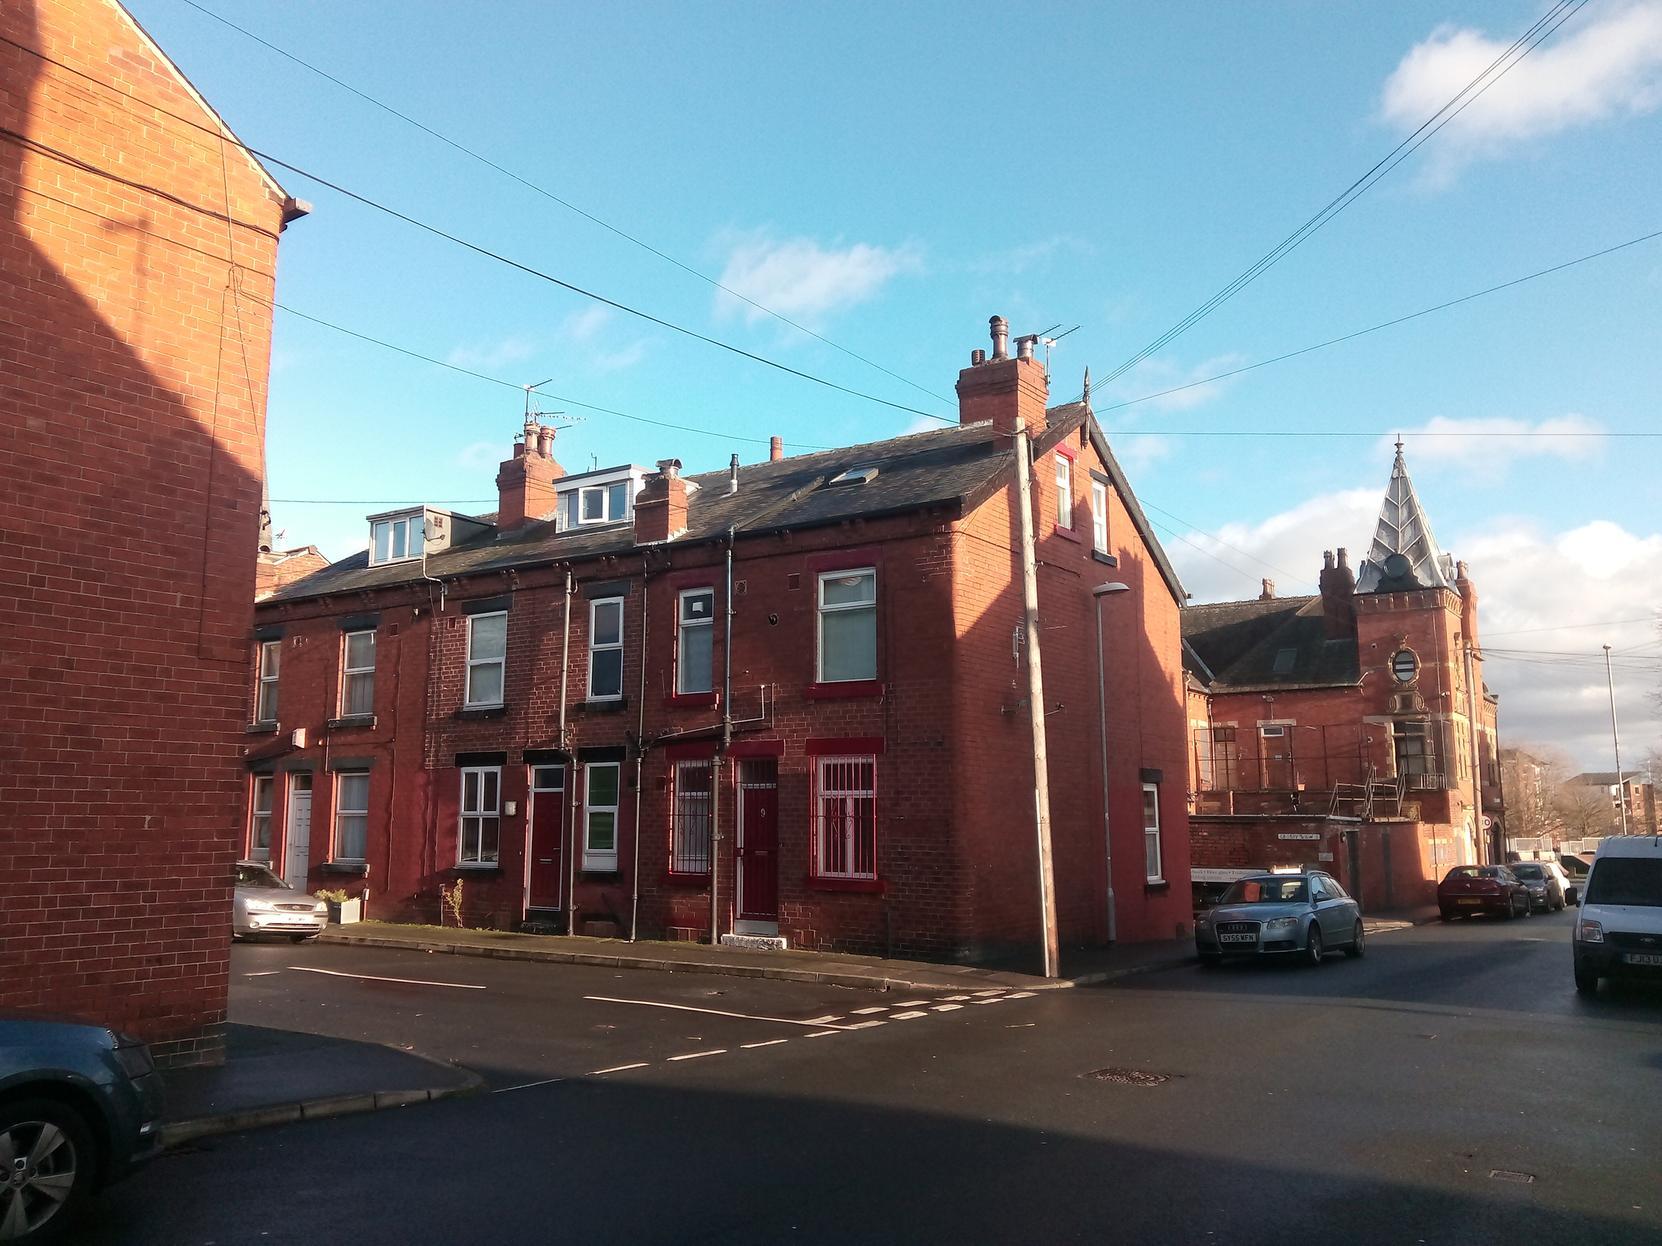 Holbeck is the other end of the Leeds Central boundary with a varied community. Pictured are the back to back terraced houses.